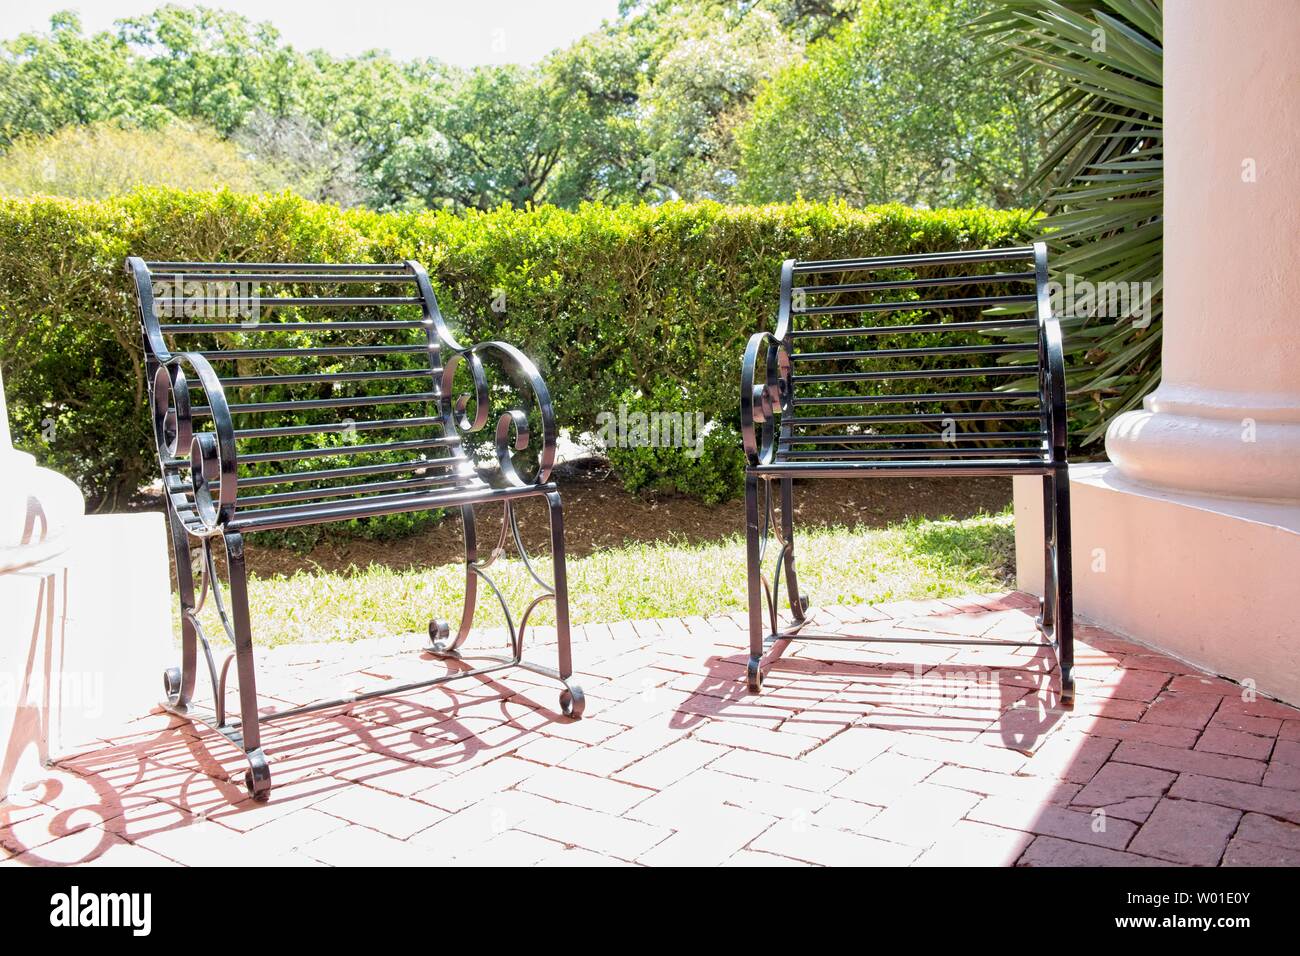 Two wrought iron chairs sit on a brick patio overlooking beautifully landscaped lawn Stock Photo